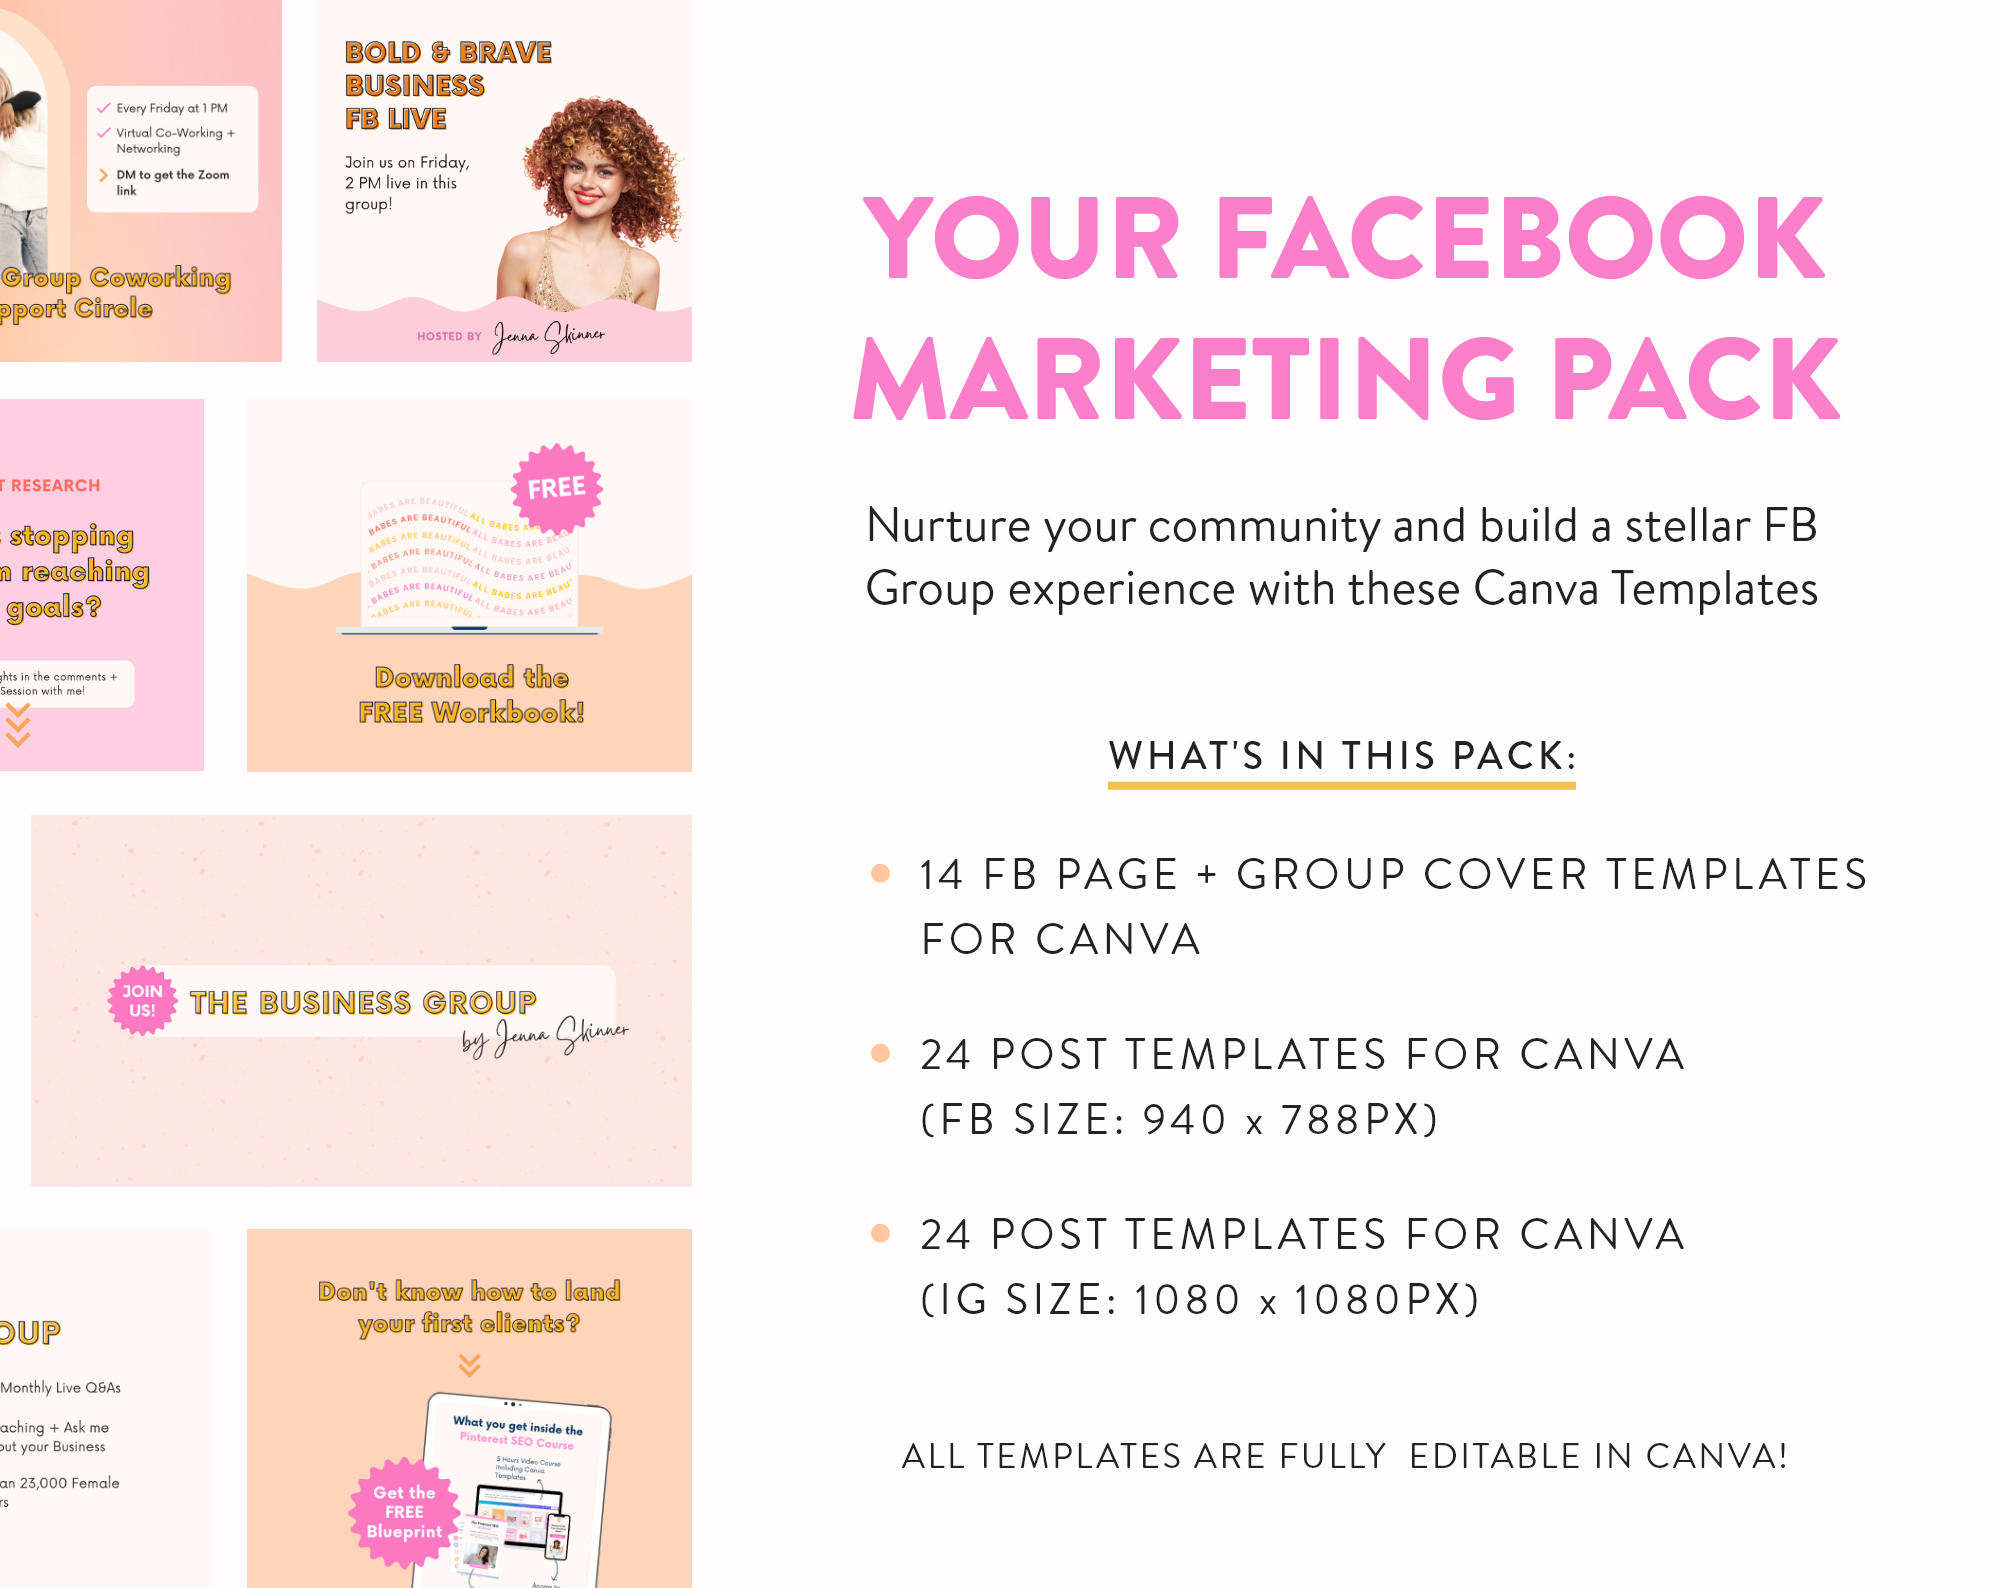 Facebook-marketing-templates-pack-for-canva-start-1